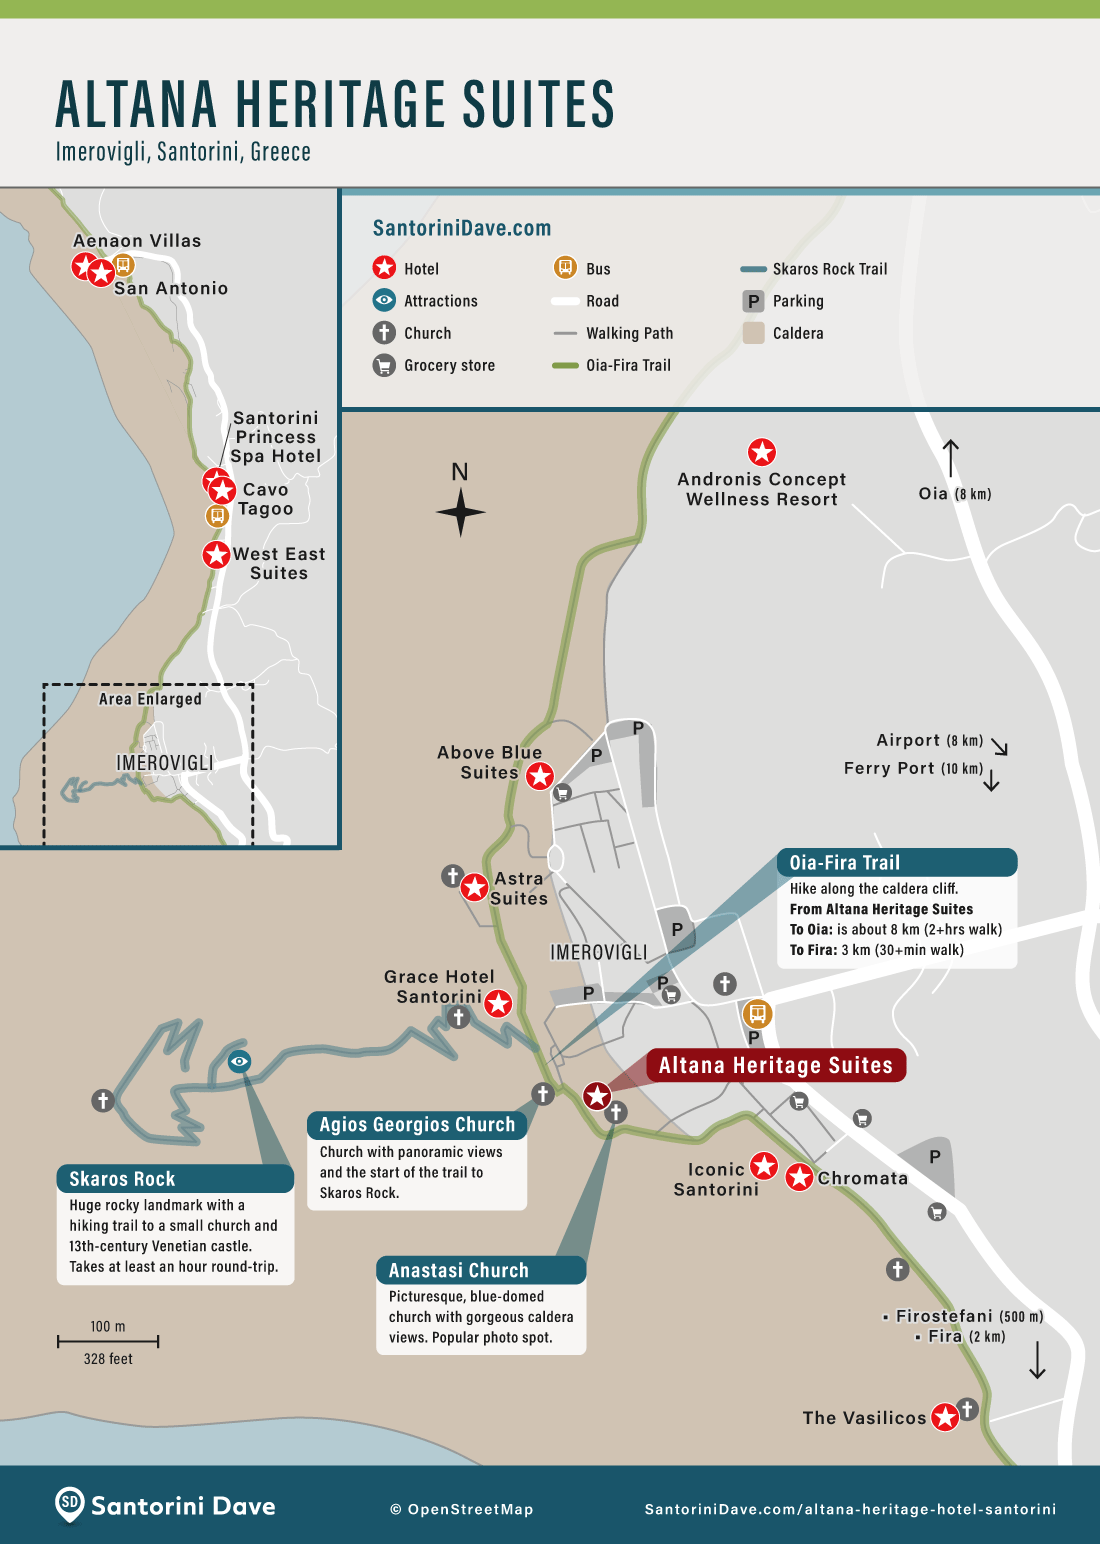 Map of Altana Heritage Suites in Imerovigli.